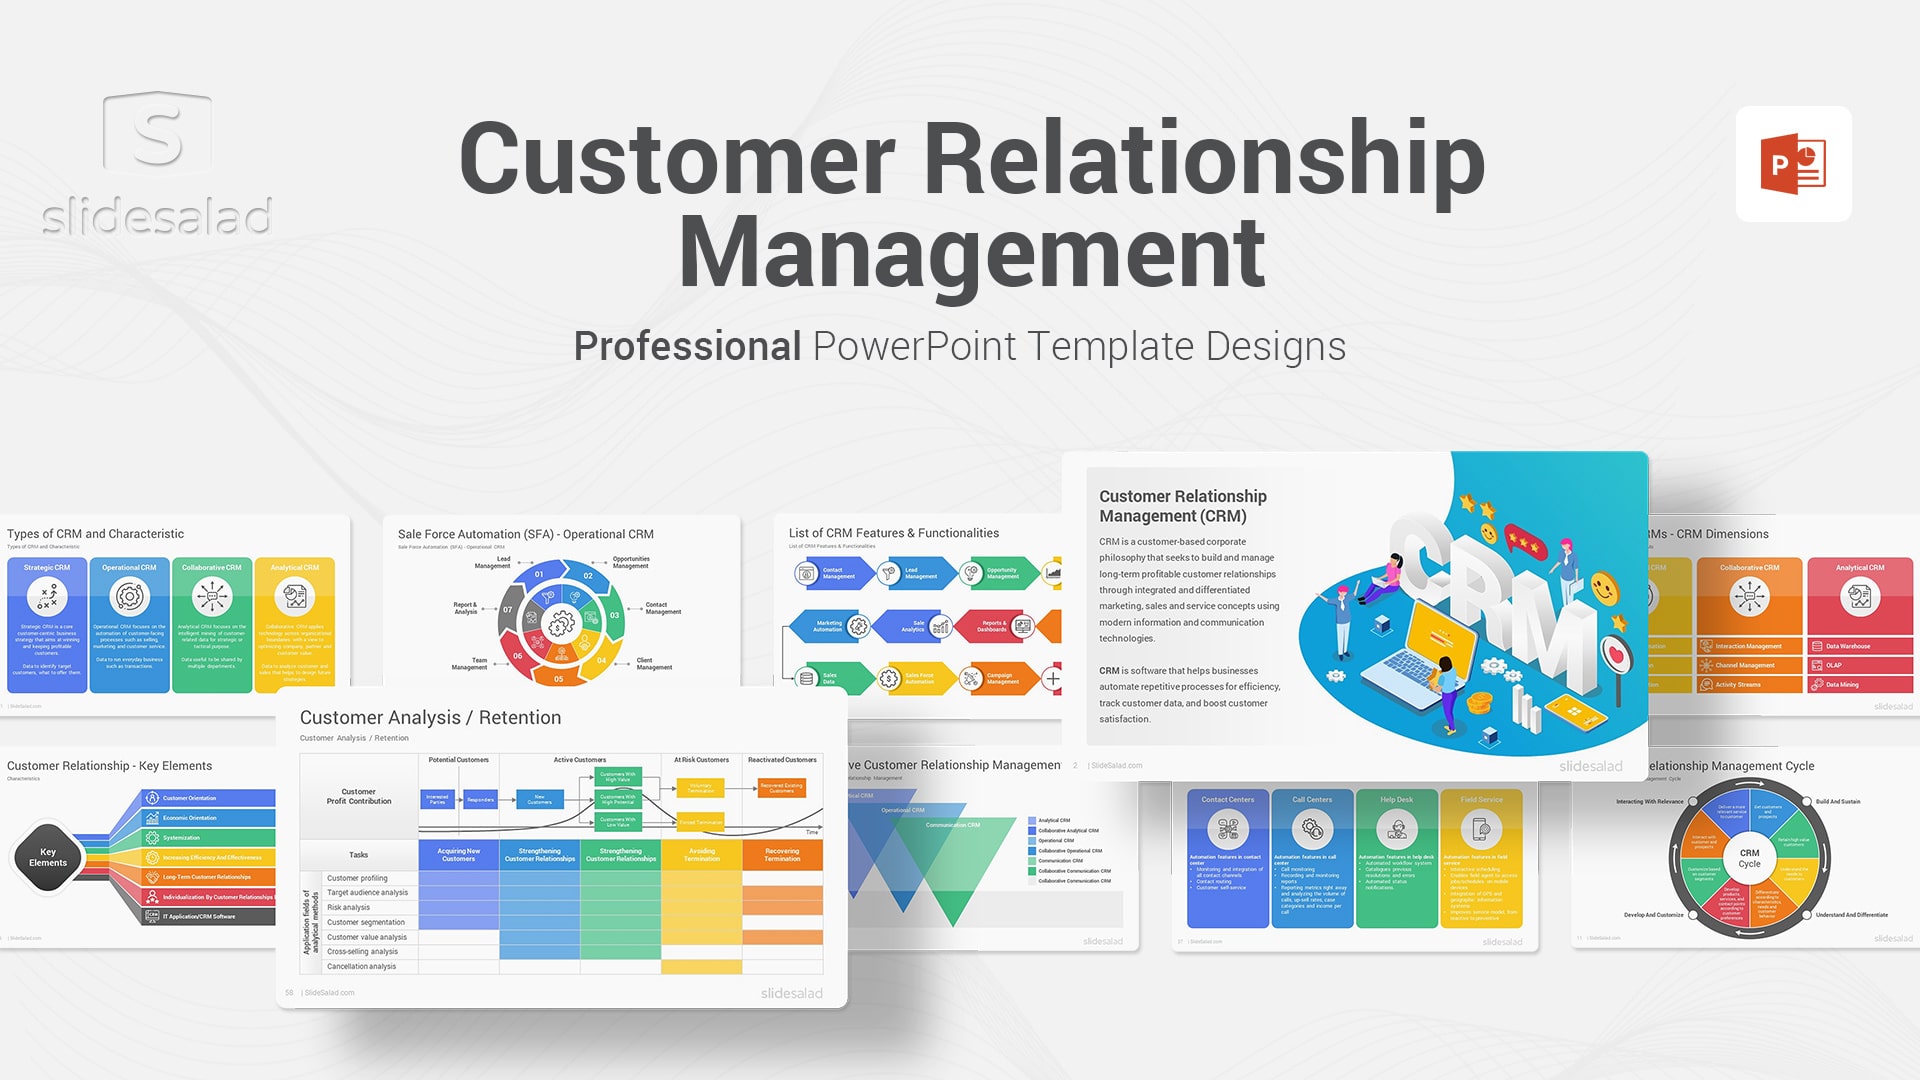 Customer Relationship Management PowerPoint Template Designs - Best CRM Sales and Marketing PowerPoint Template